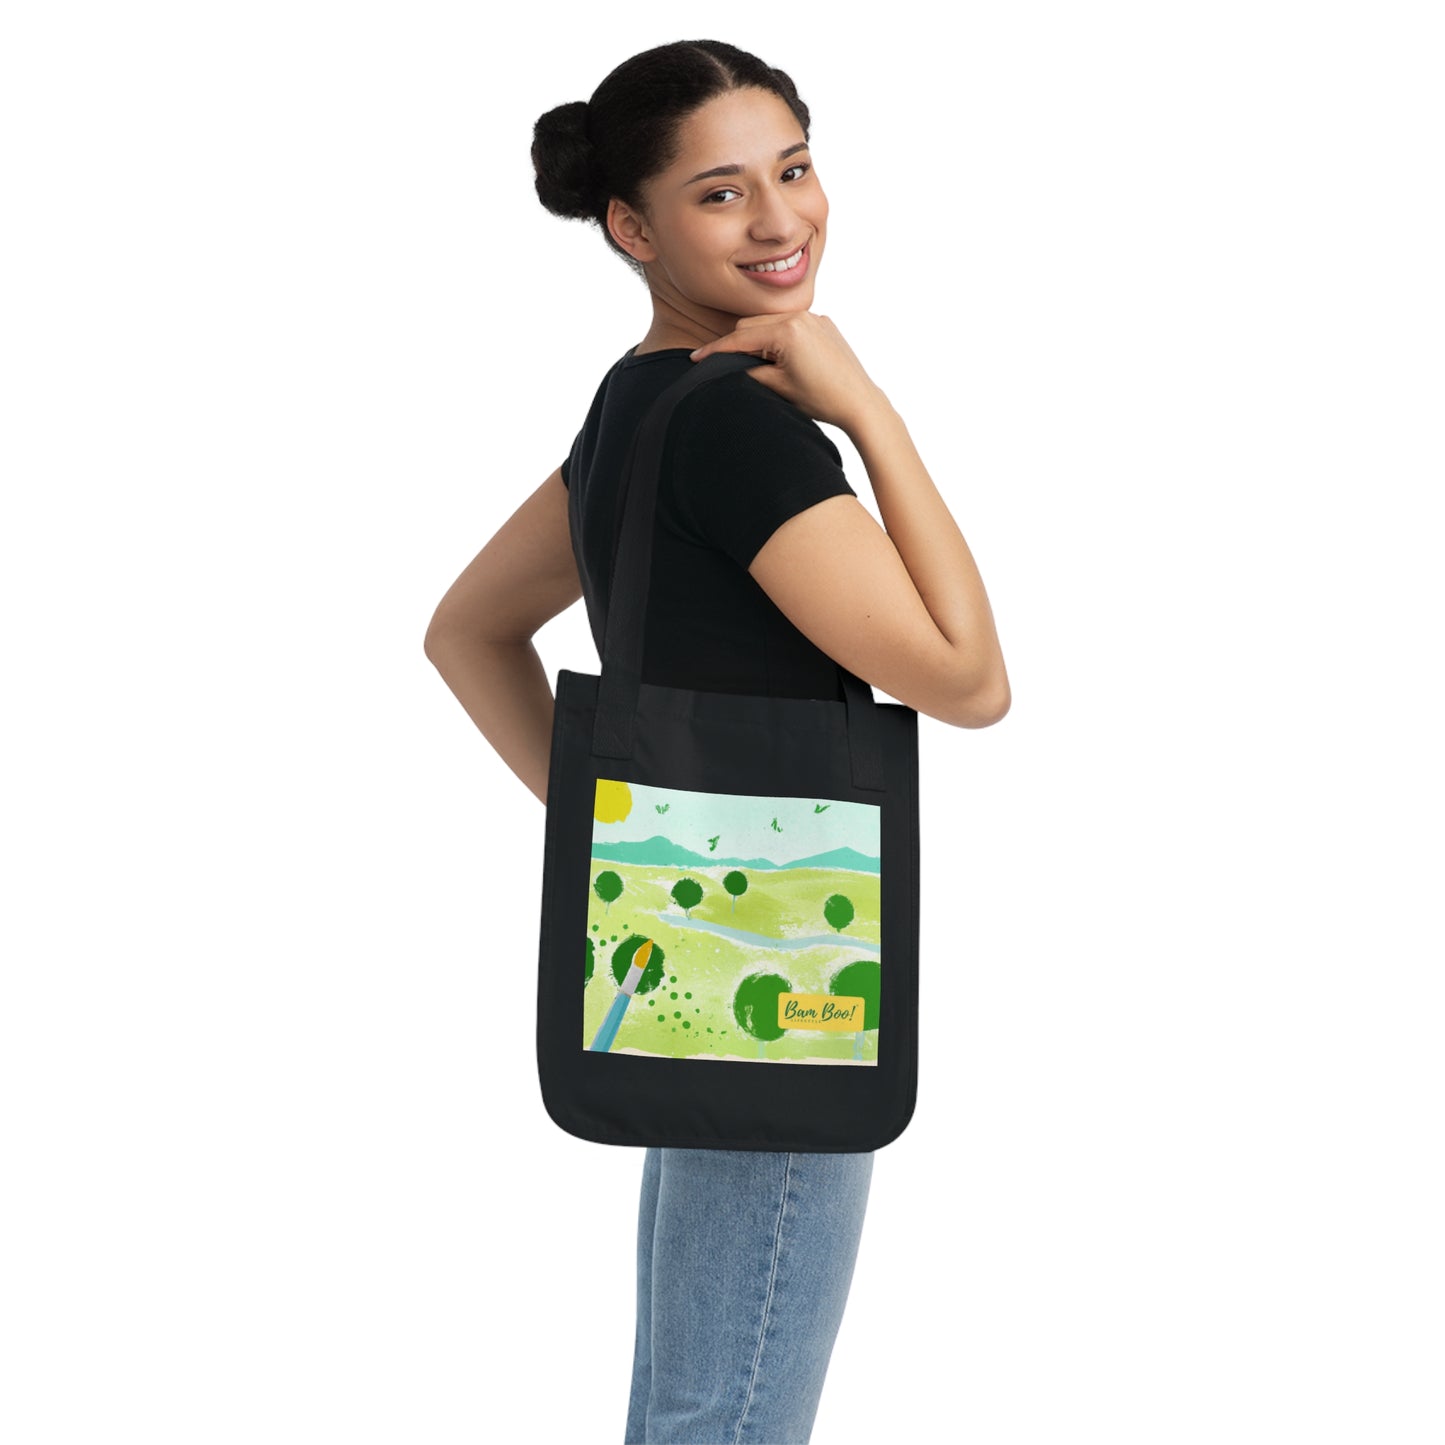 "Nature's Palette: Capturing the Splendor of the Wild" - Bam Boo! Lifestyle Eco-friendly Tote Bag